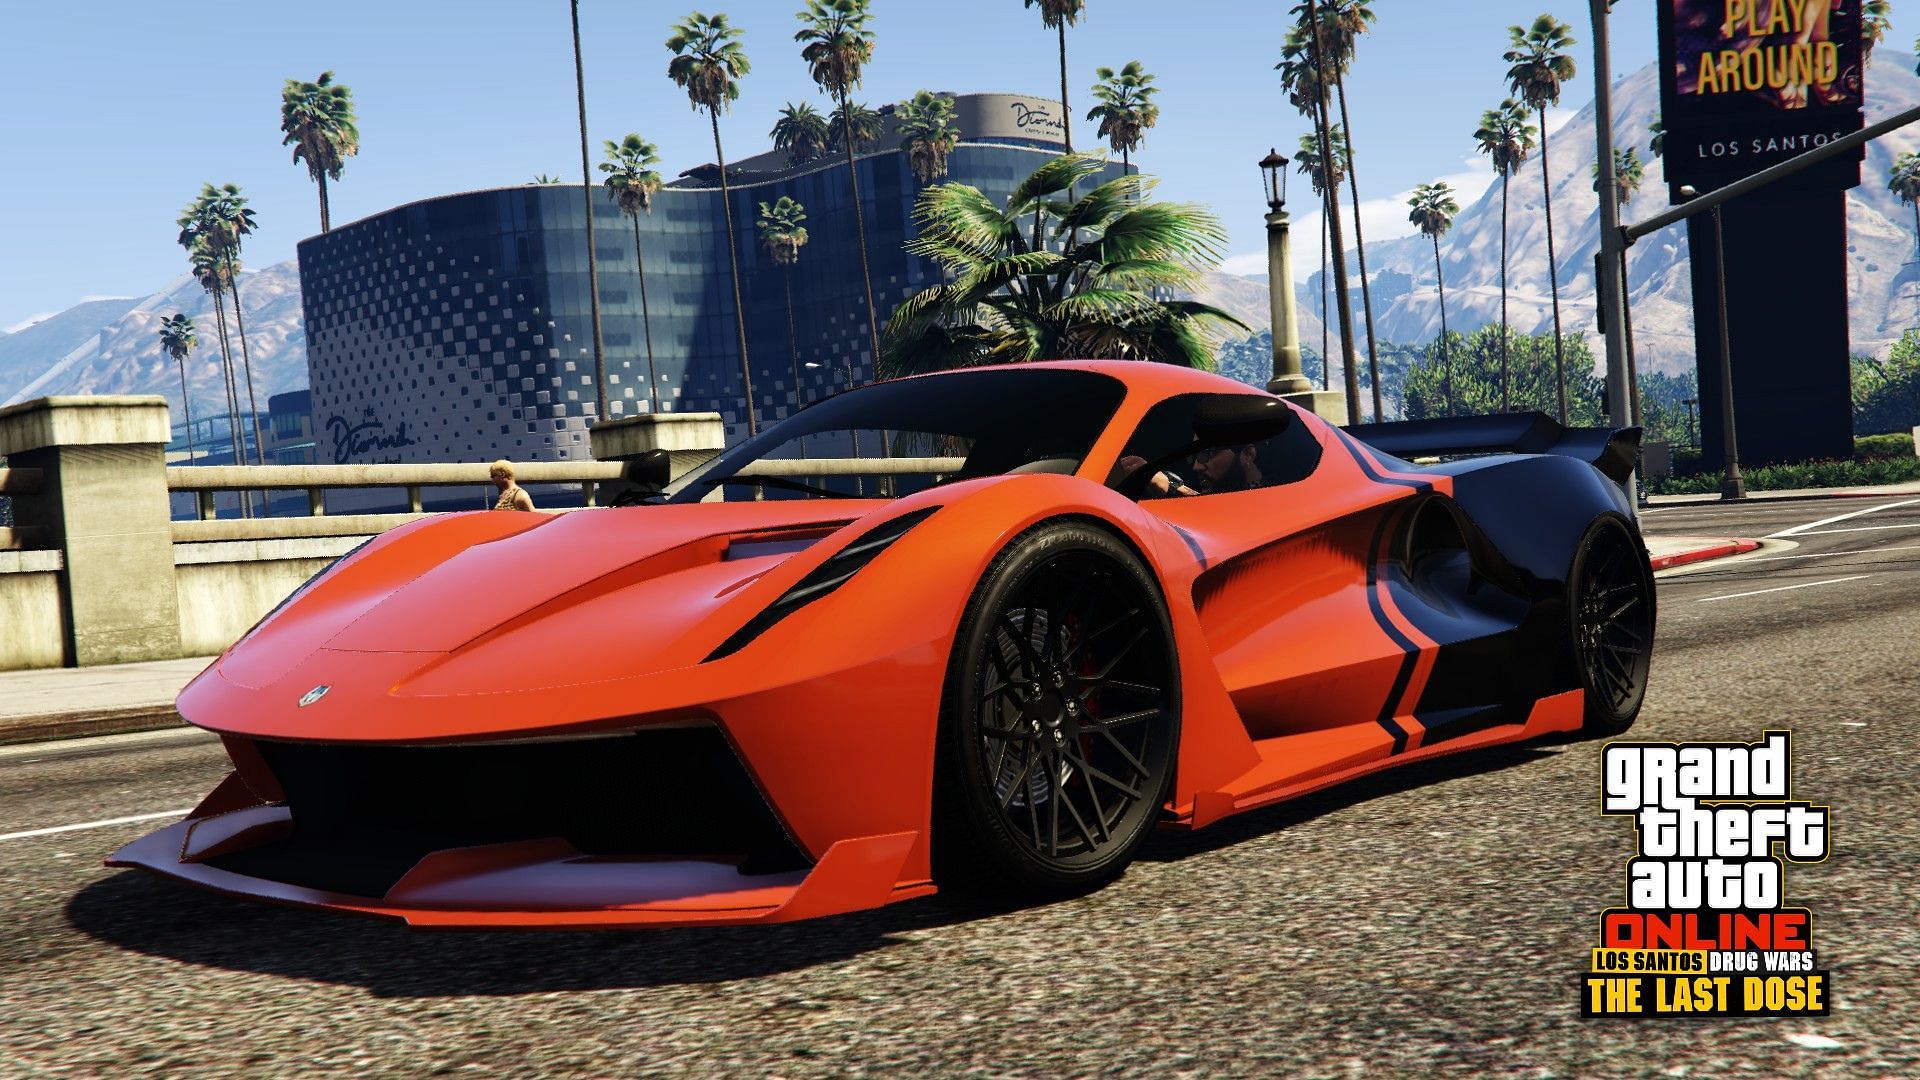 New GTA Online update event details reportedly revealed by Rockstar